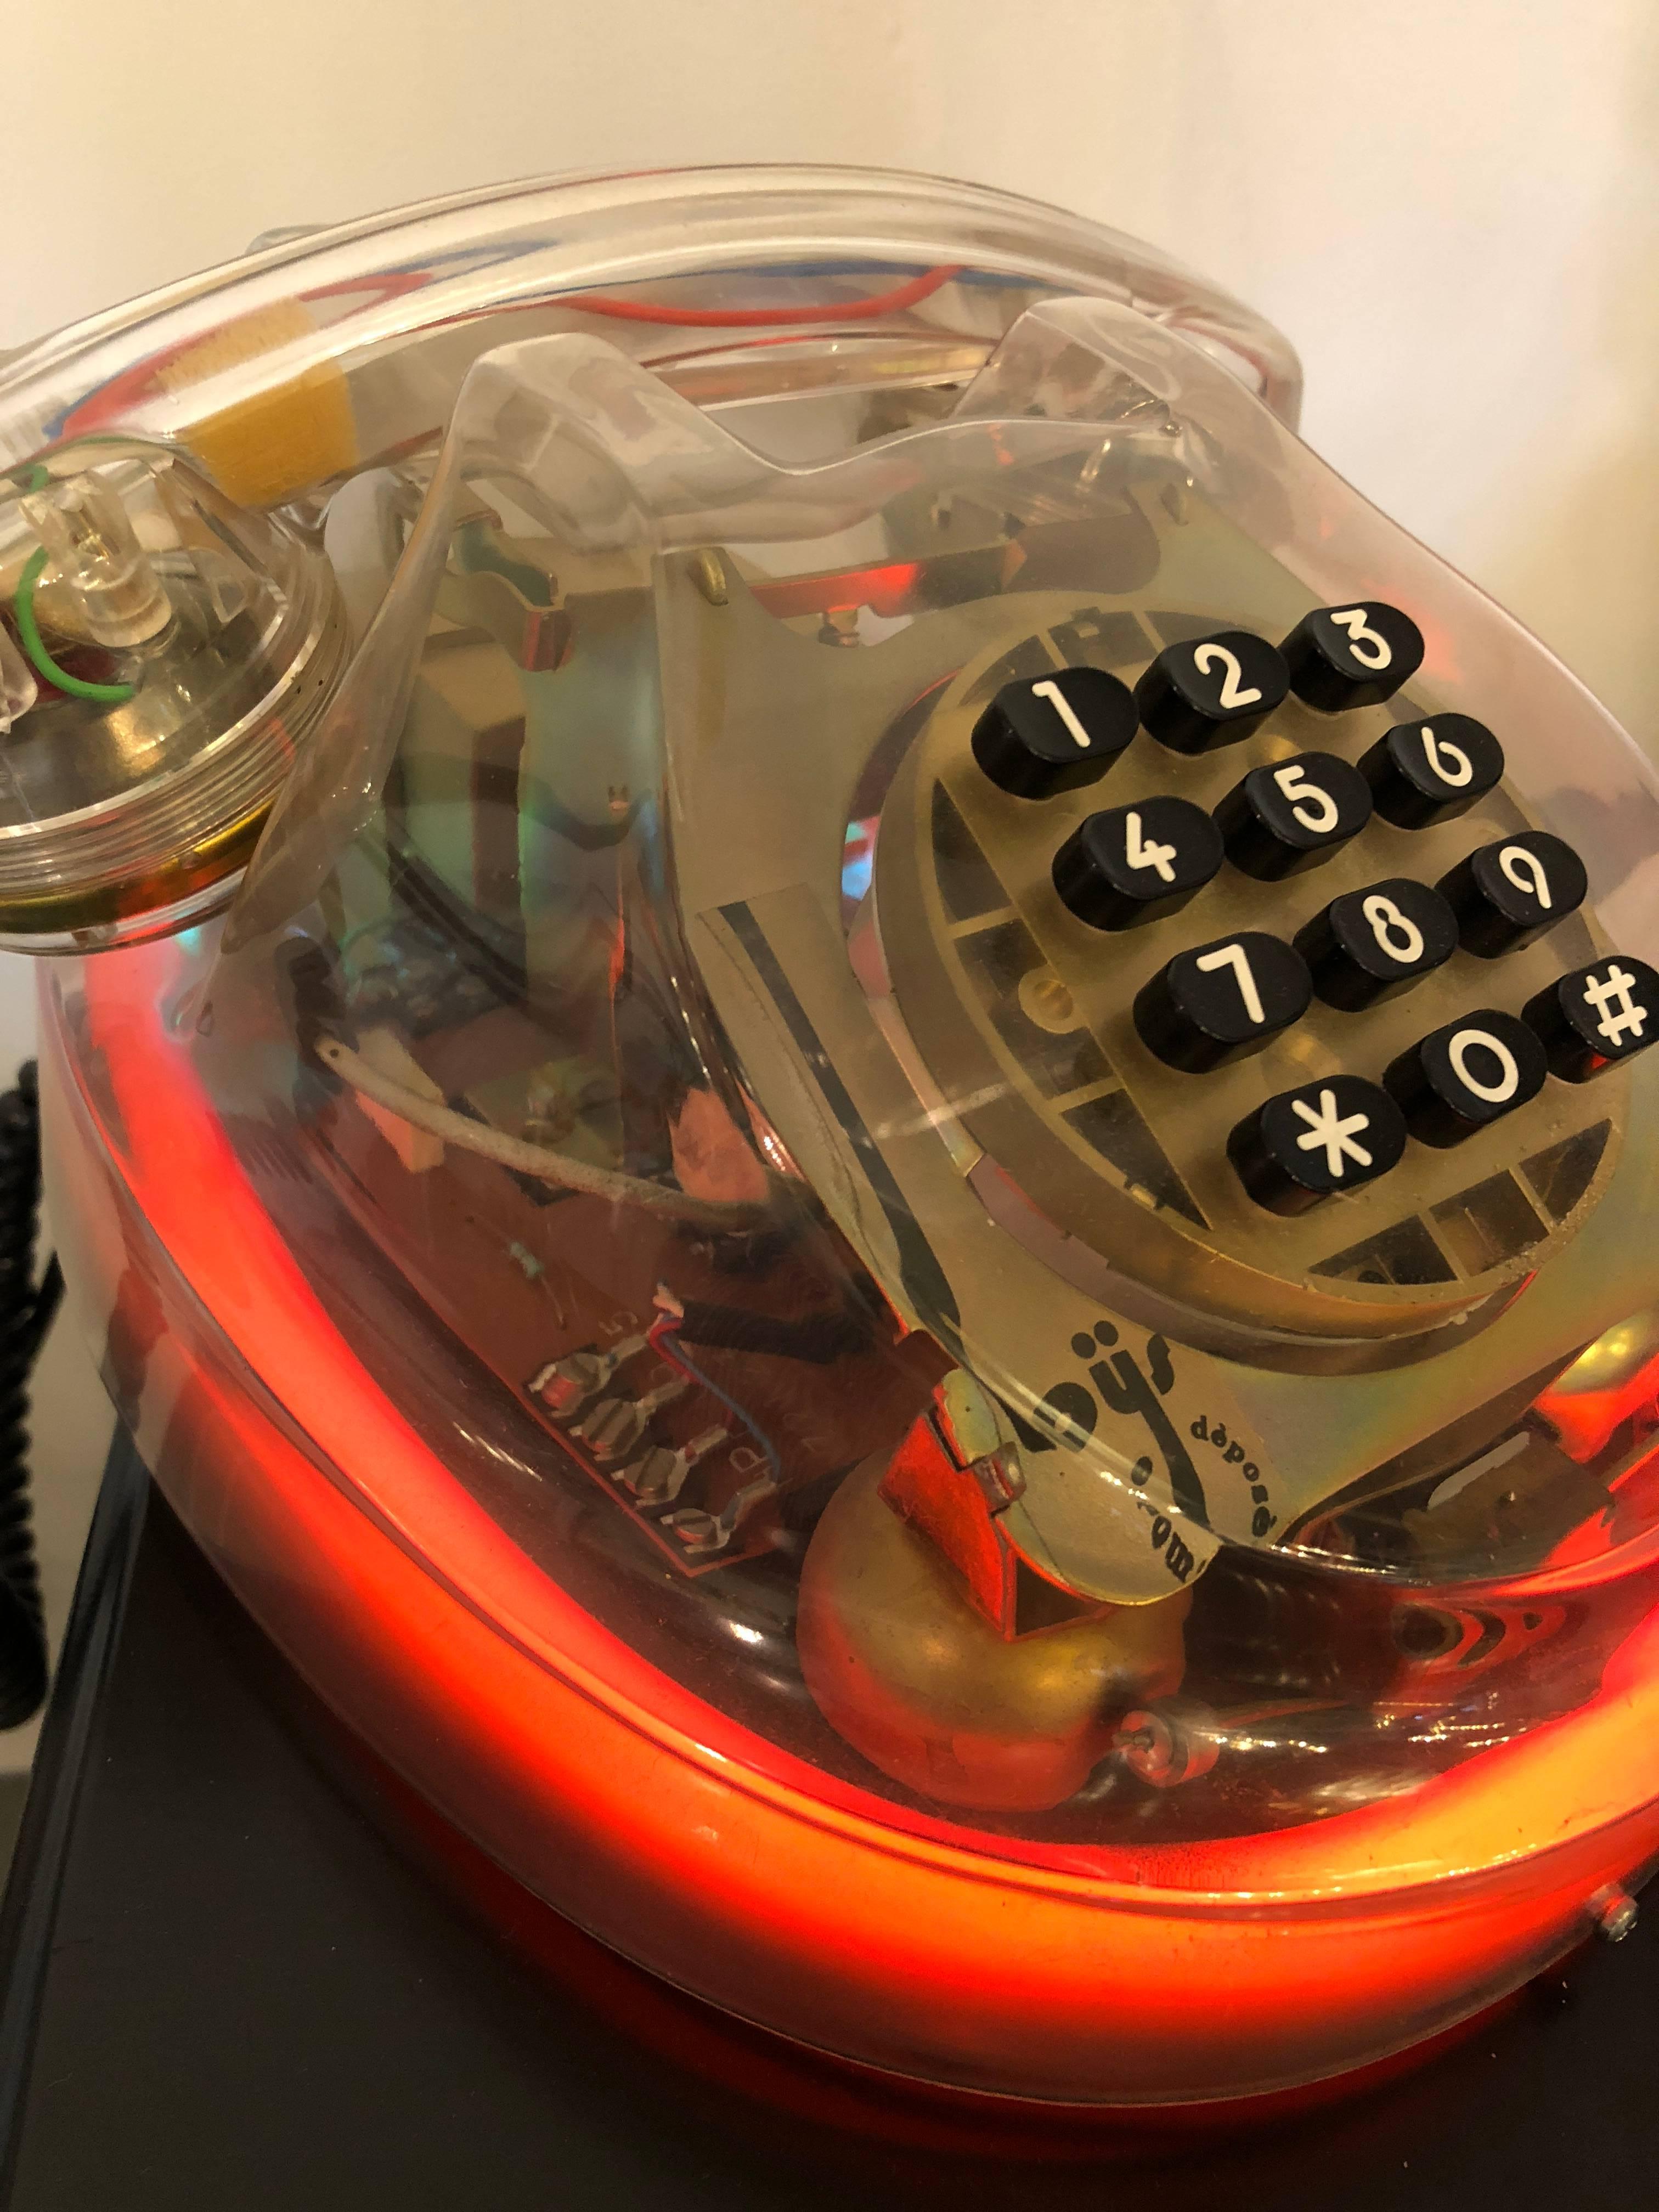 Offered is a Mid-Century Modern /Postmodern French Loys Lucite neon see through telephone. How much fun is this very mod Lucite phone made in France. Plug it in and it lights up with a neon red! Would make a great gift for a teen or young adult.